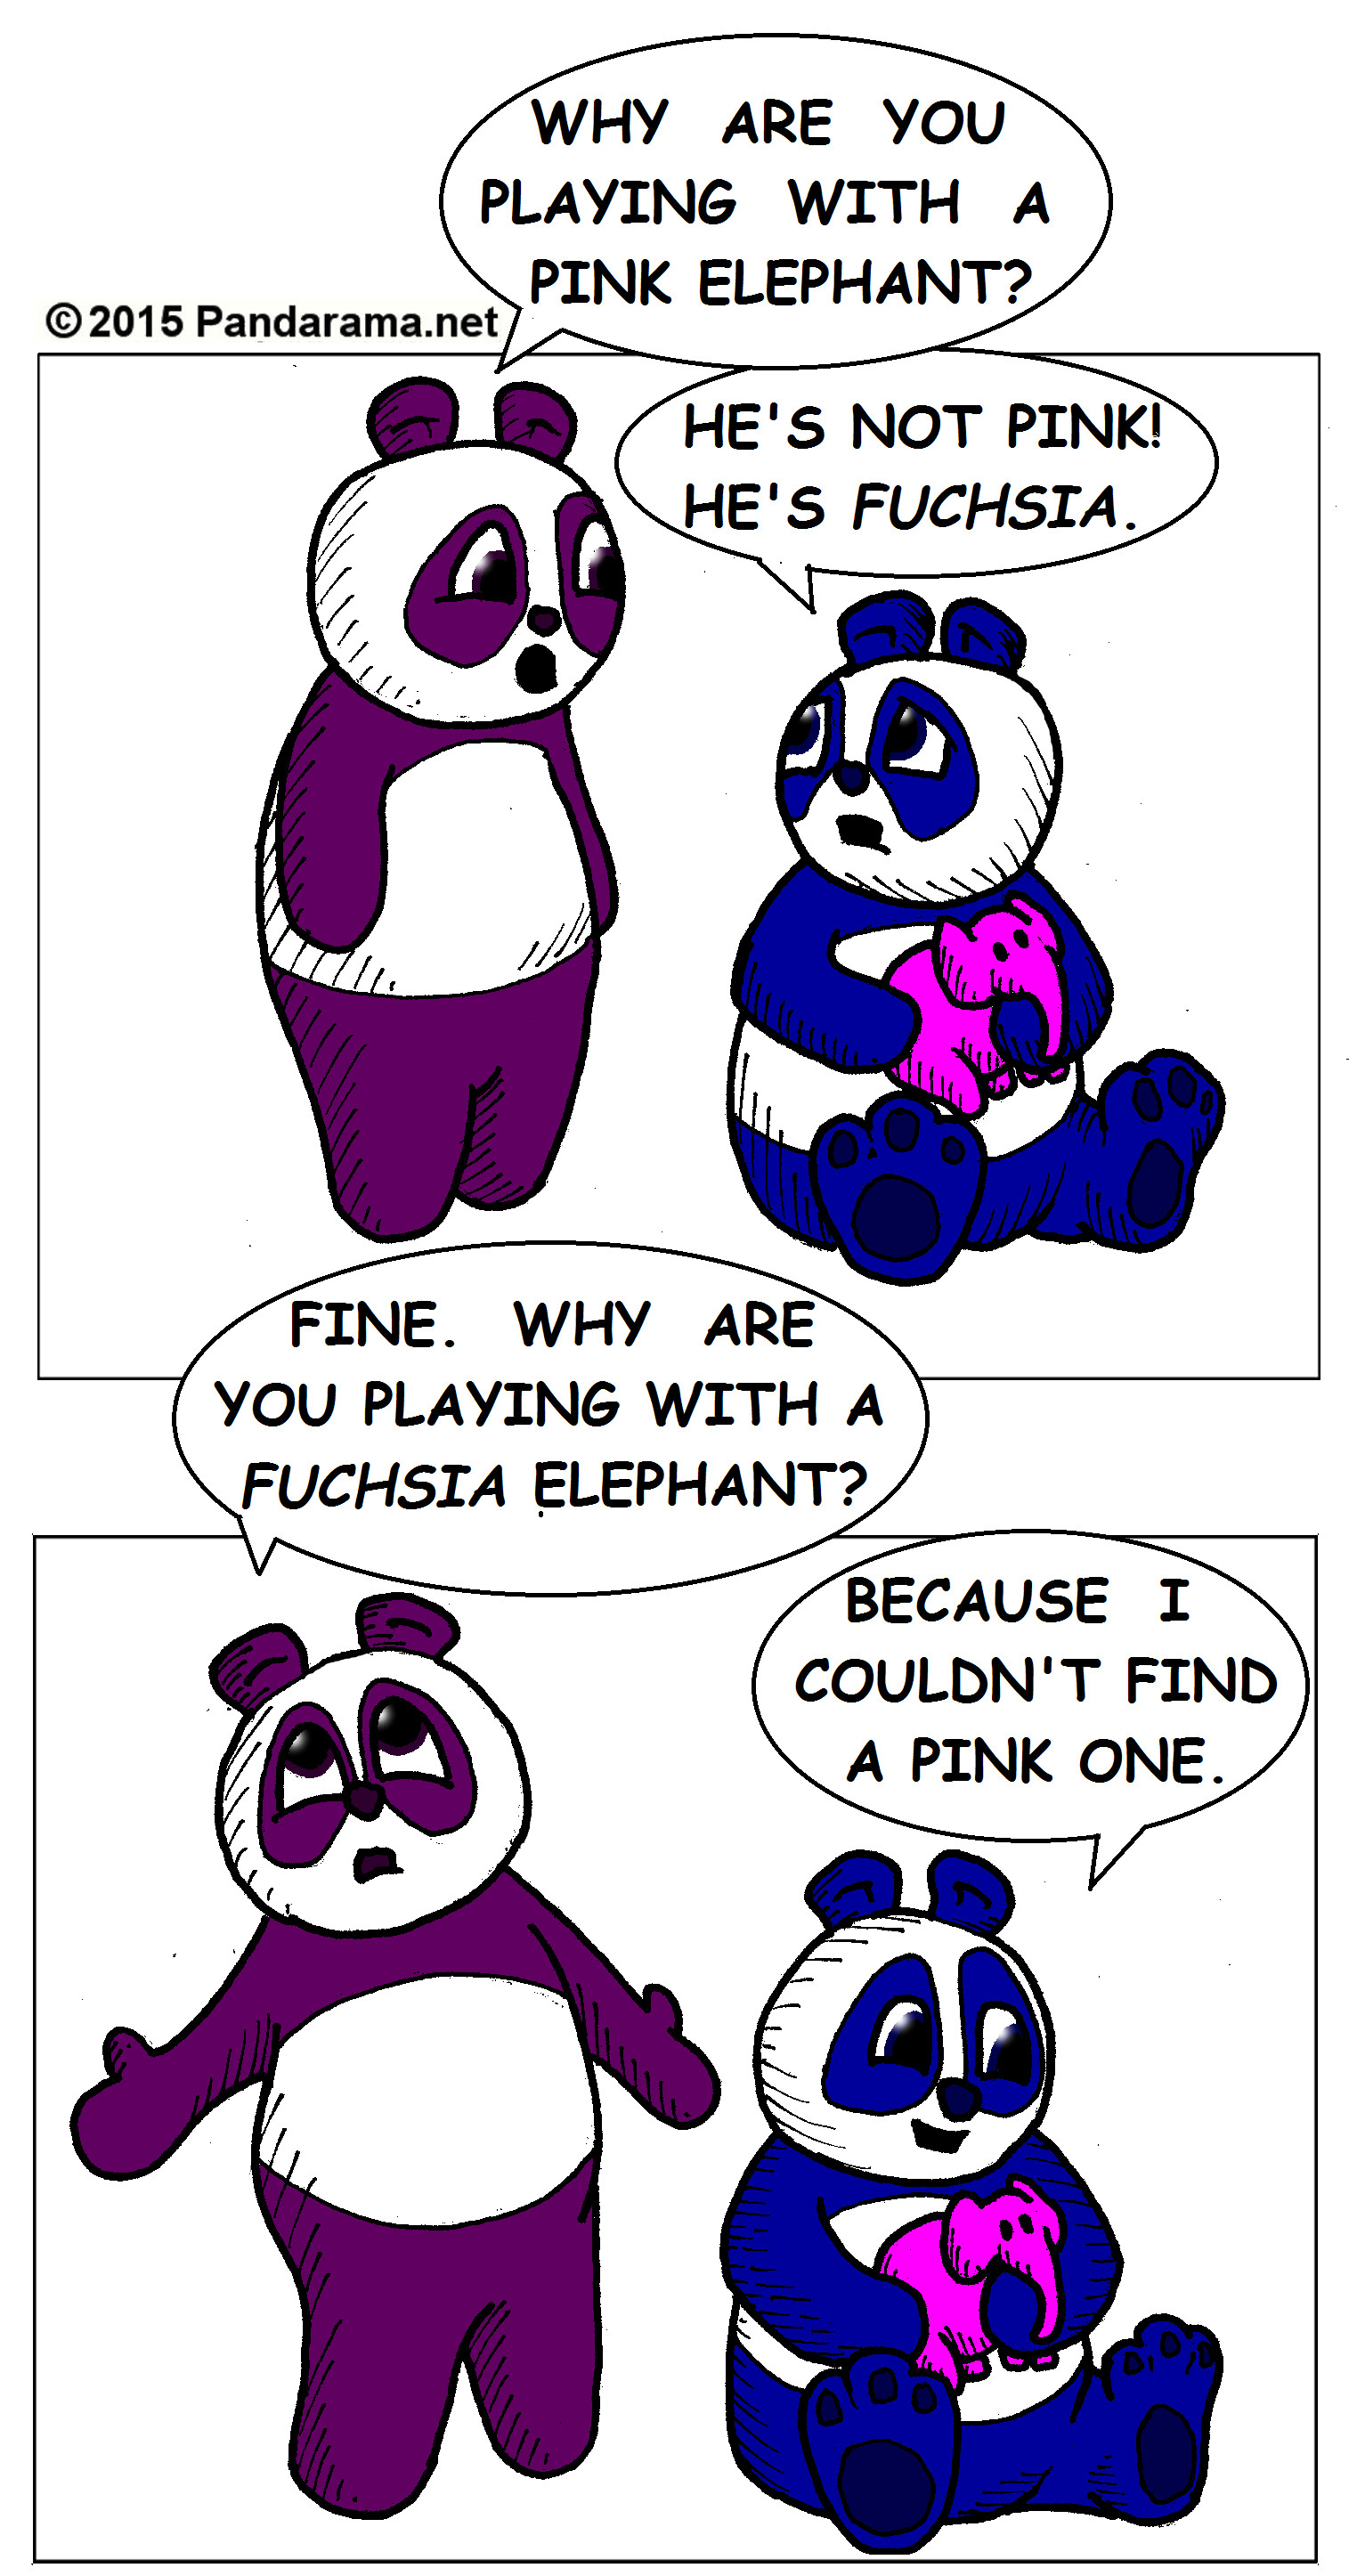 pandarama comicstrip, why are you playing with a pink elephant. It's fuchsia. Why are you playing with a fuchsia elephant. I couldn't find a pink one.